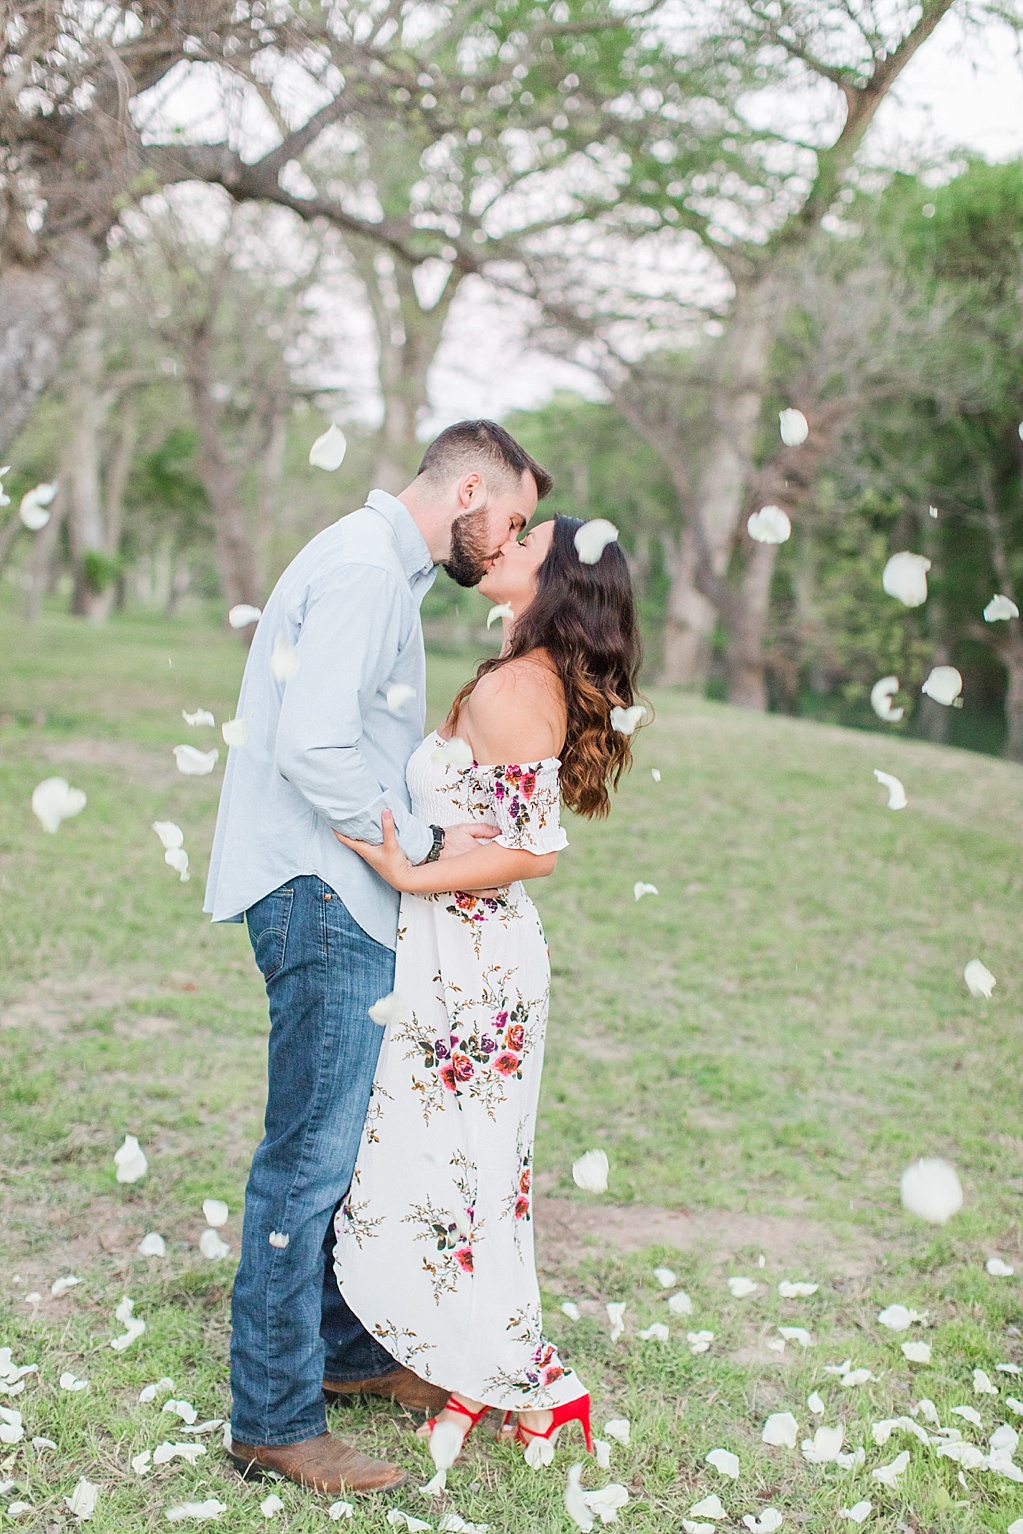 Eagle Dancer Ranch Engagement Photo Session in Boerne, Texas by Allison Jeffers Photography 0066